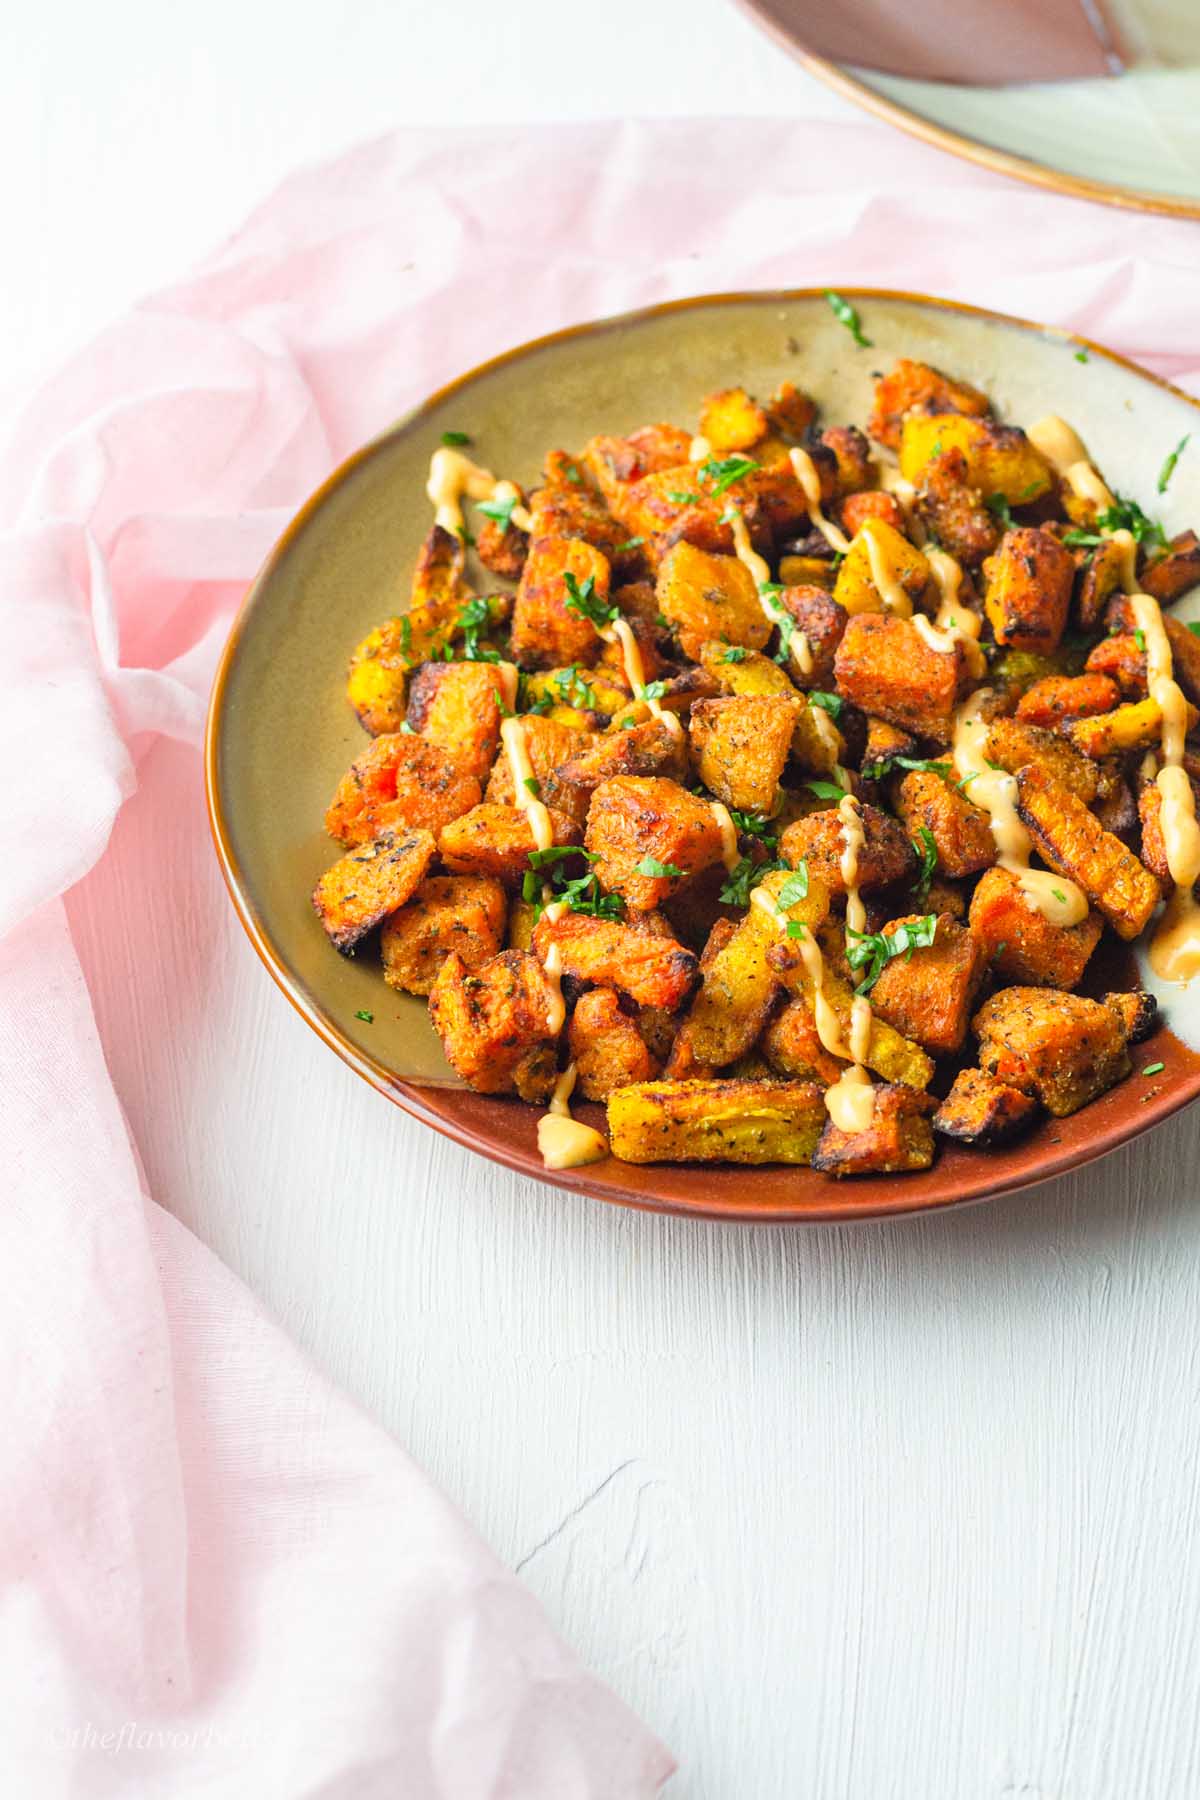 delicious looking plate of sweet potato chunks cooked with carrot chunks, spiced and coated in herbs